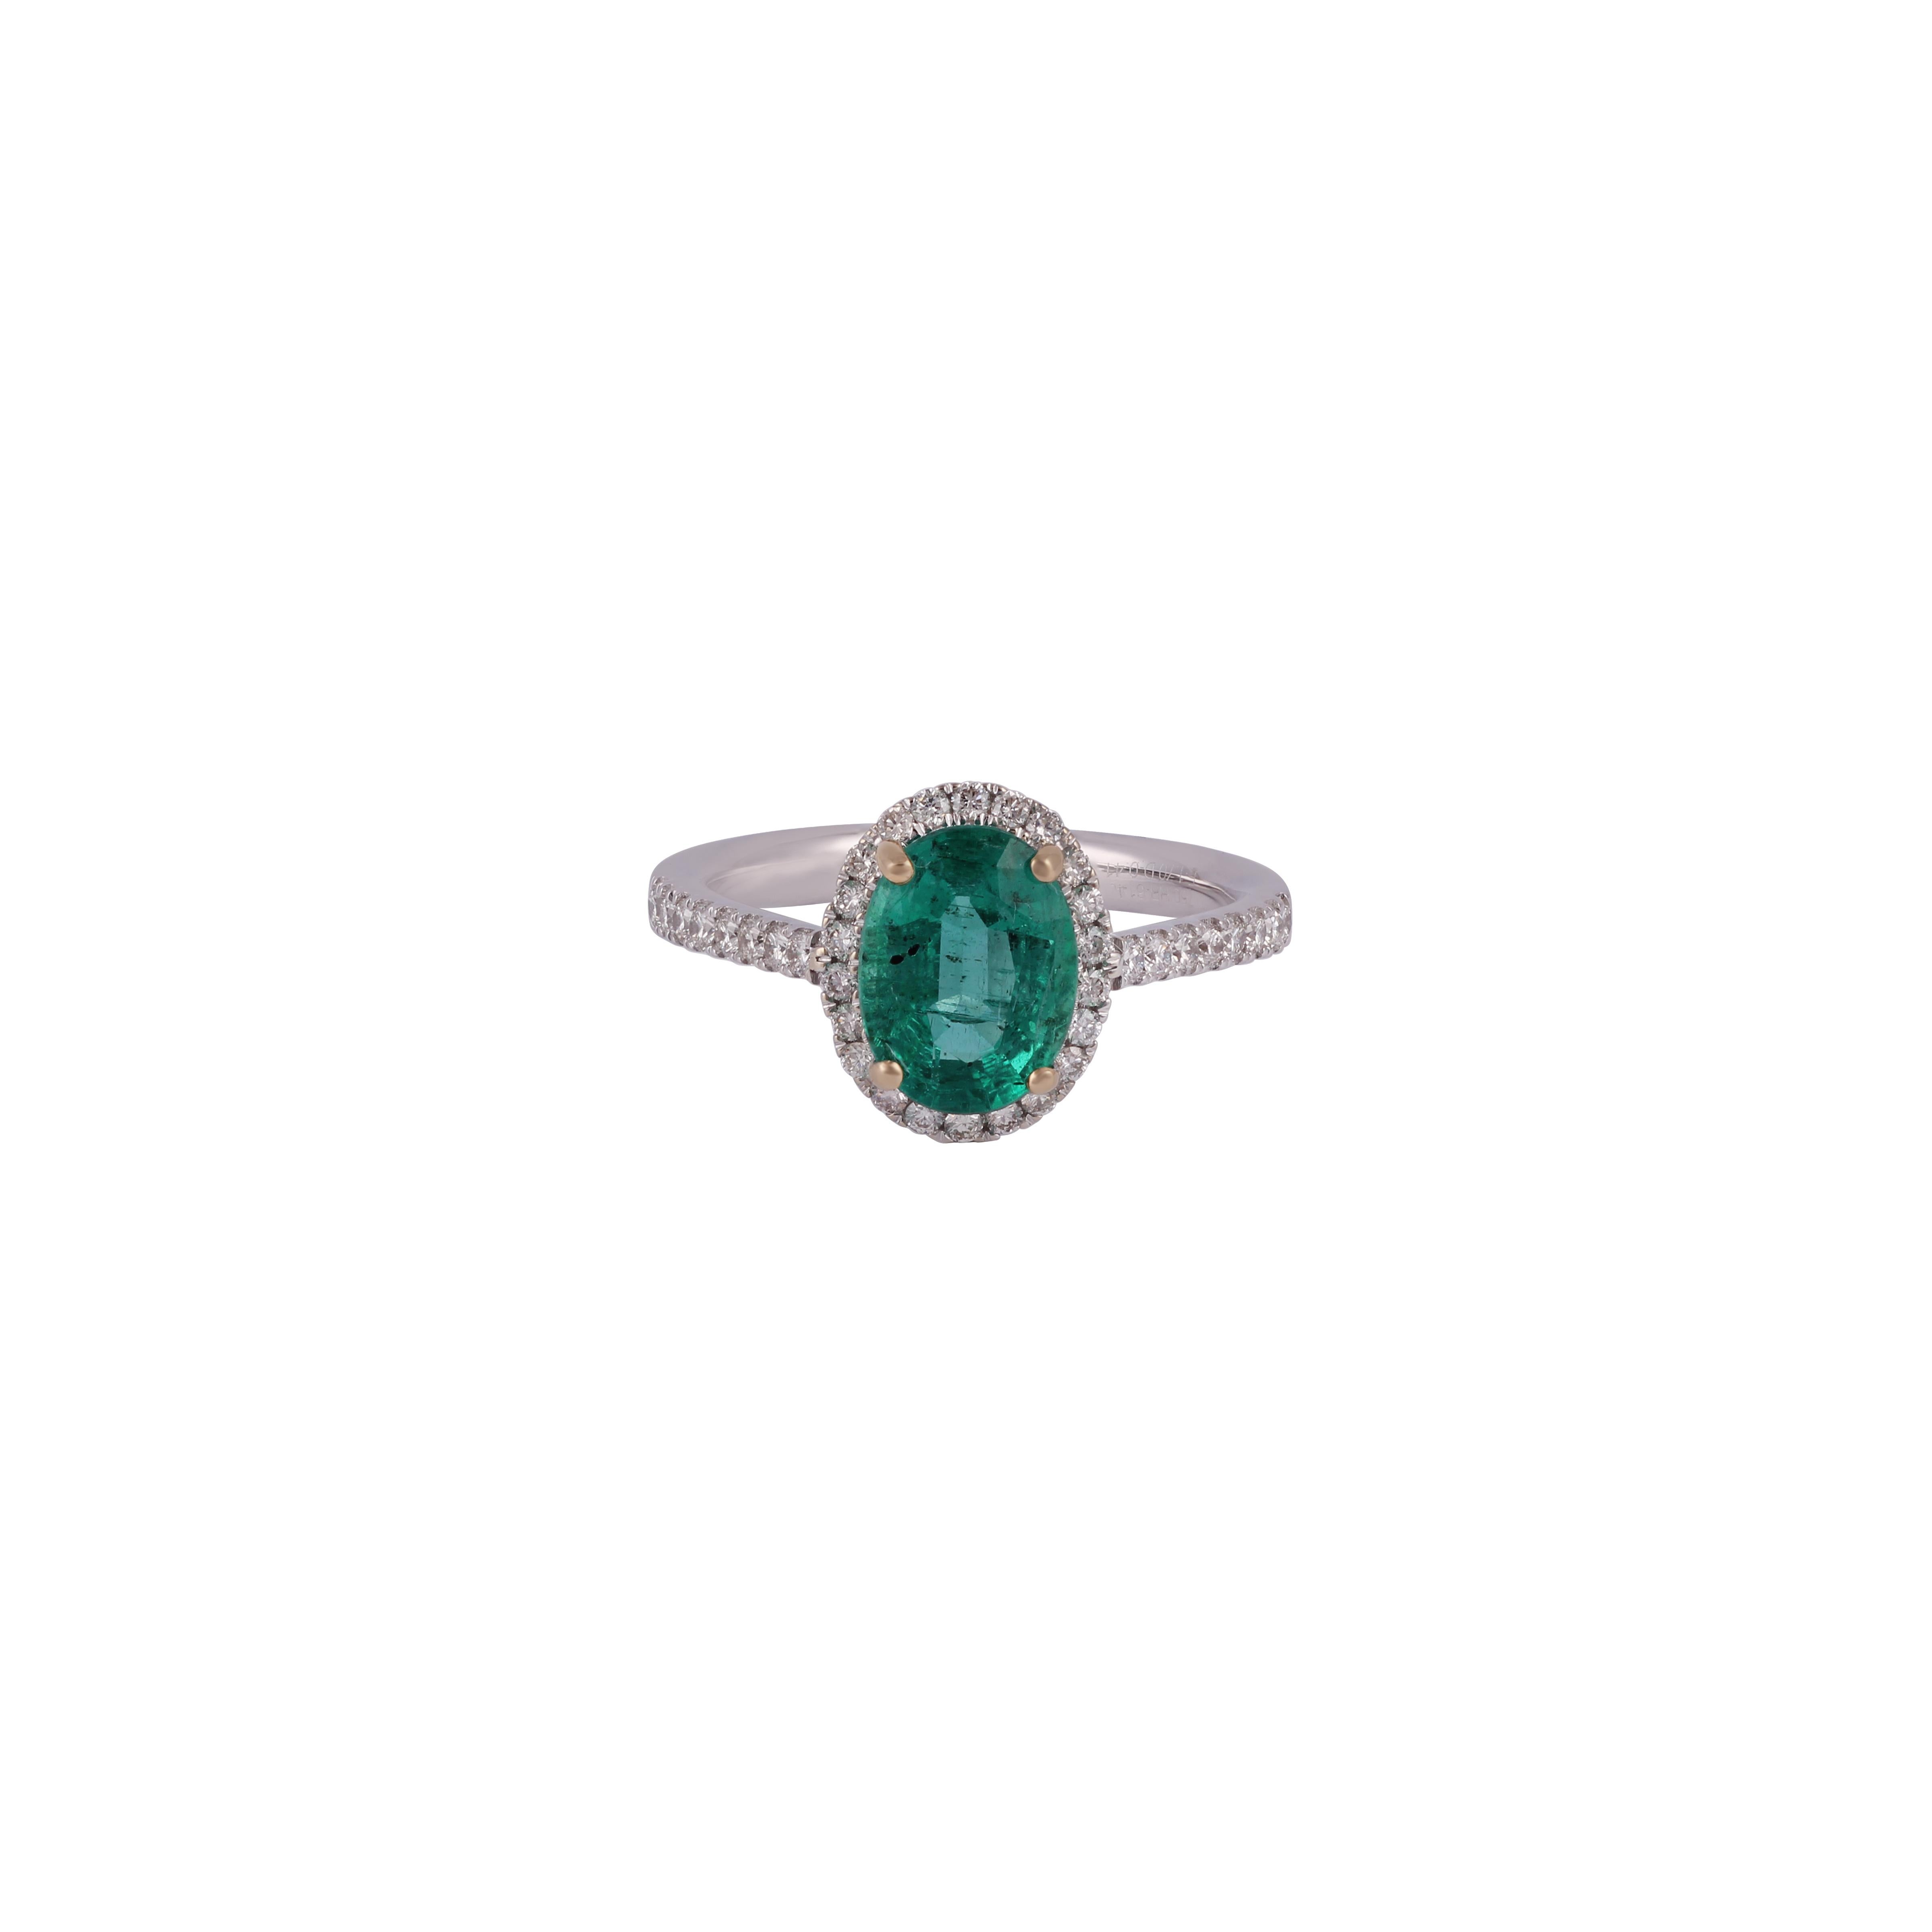 This is an elegant emerald & diamond ring studded in 18k white gold with 1 piece of oval shaped zambian emerald weight 1.70 carat which is surrounded by 38 pieces of round shaped diamonds weight 0.41 carat, this entire ring studded in 18k white gold